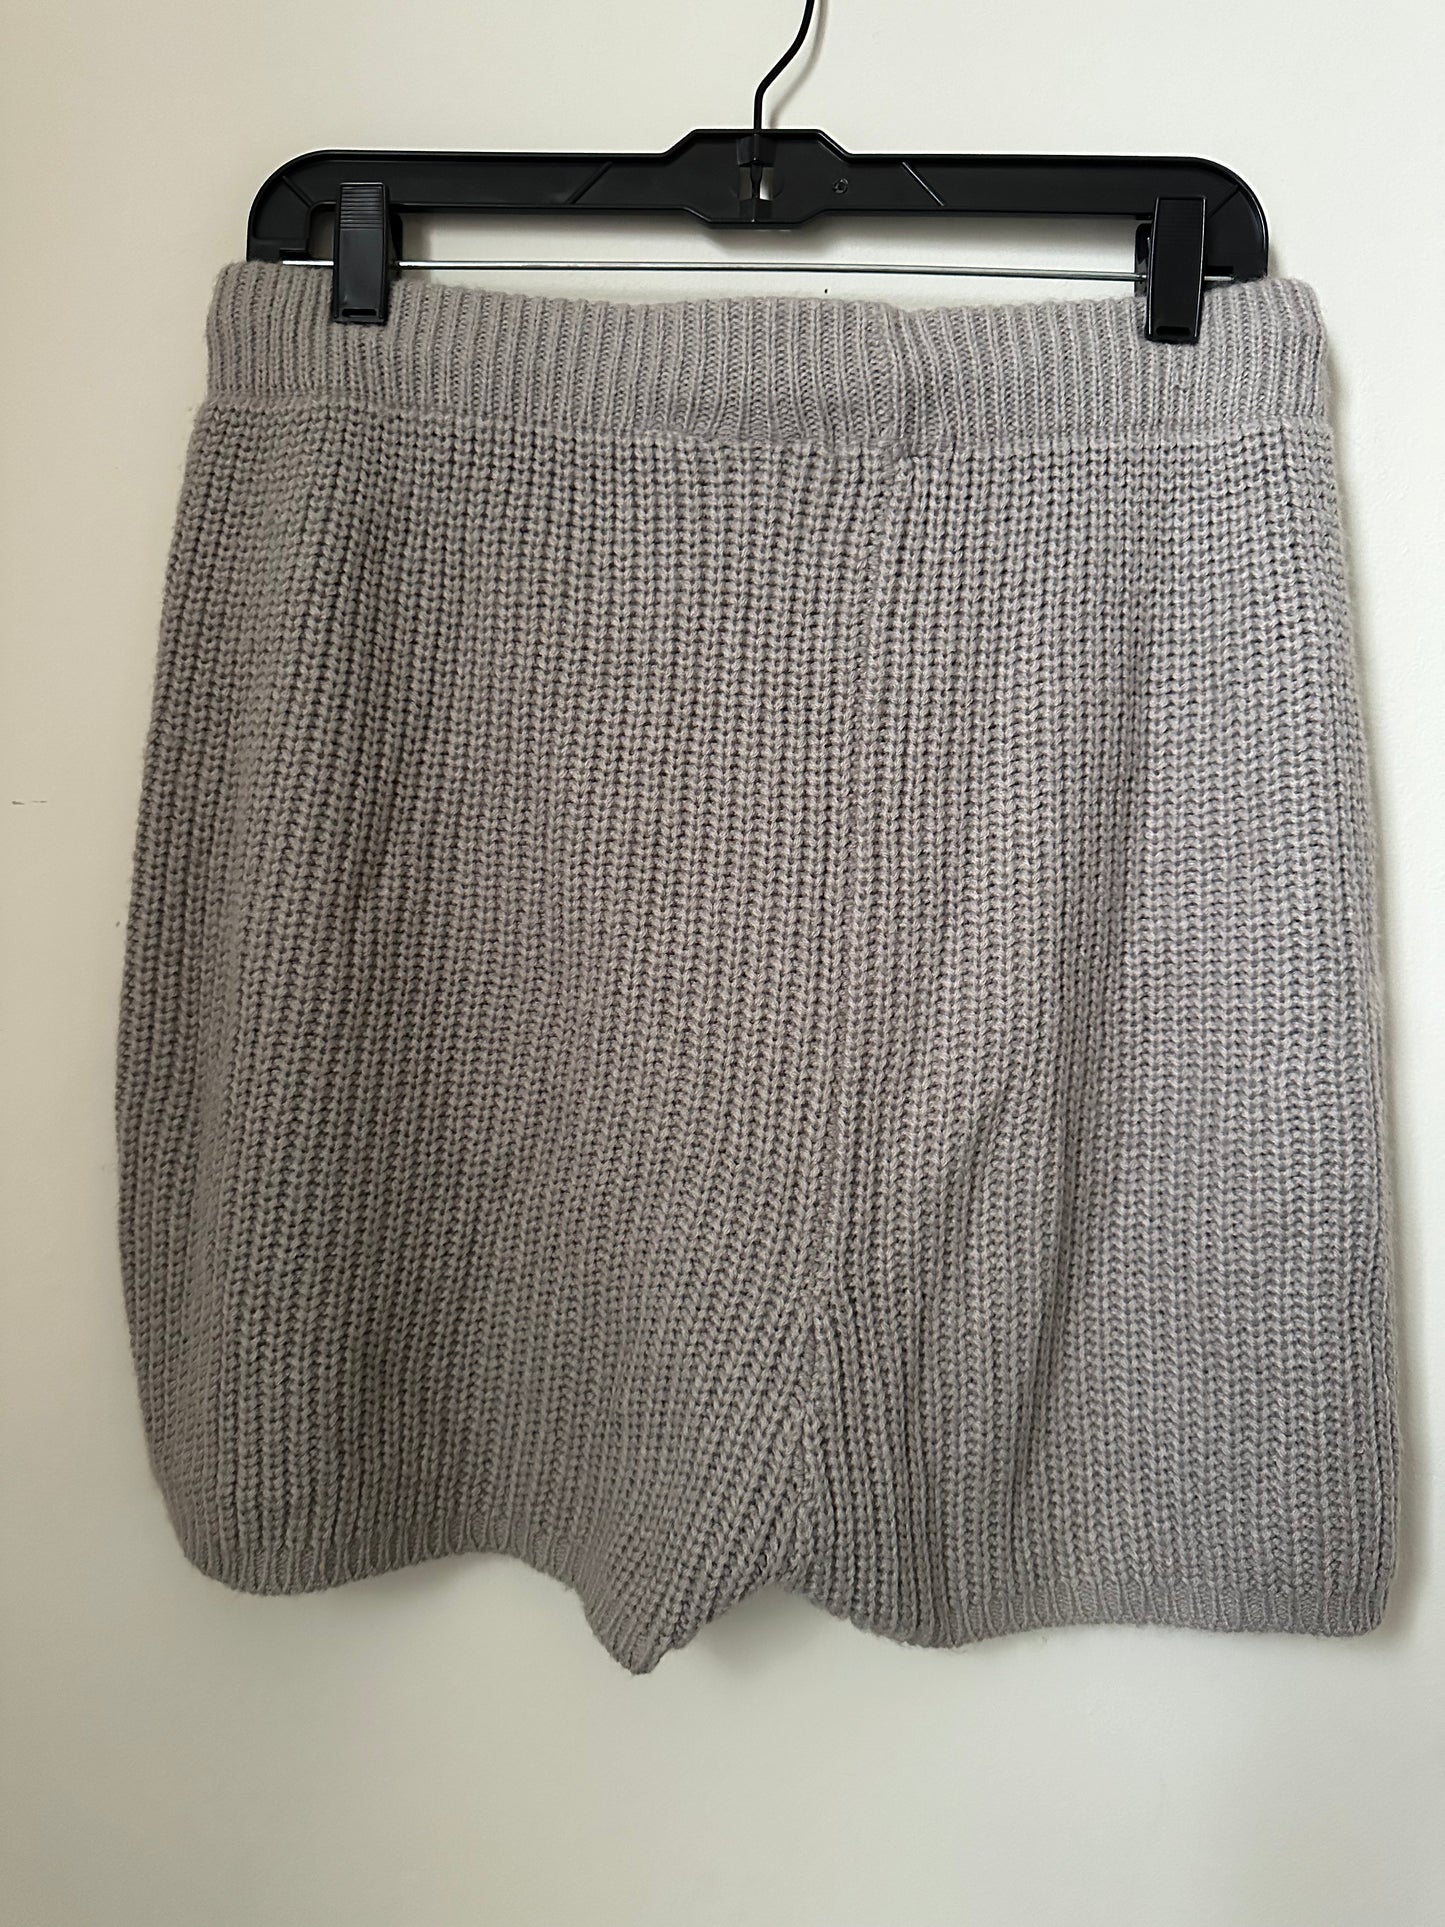 Nasty Gal Knitted Shorts , Size Large